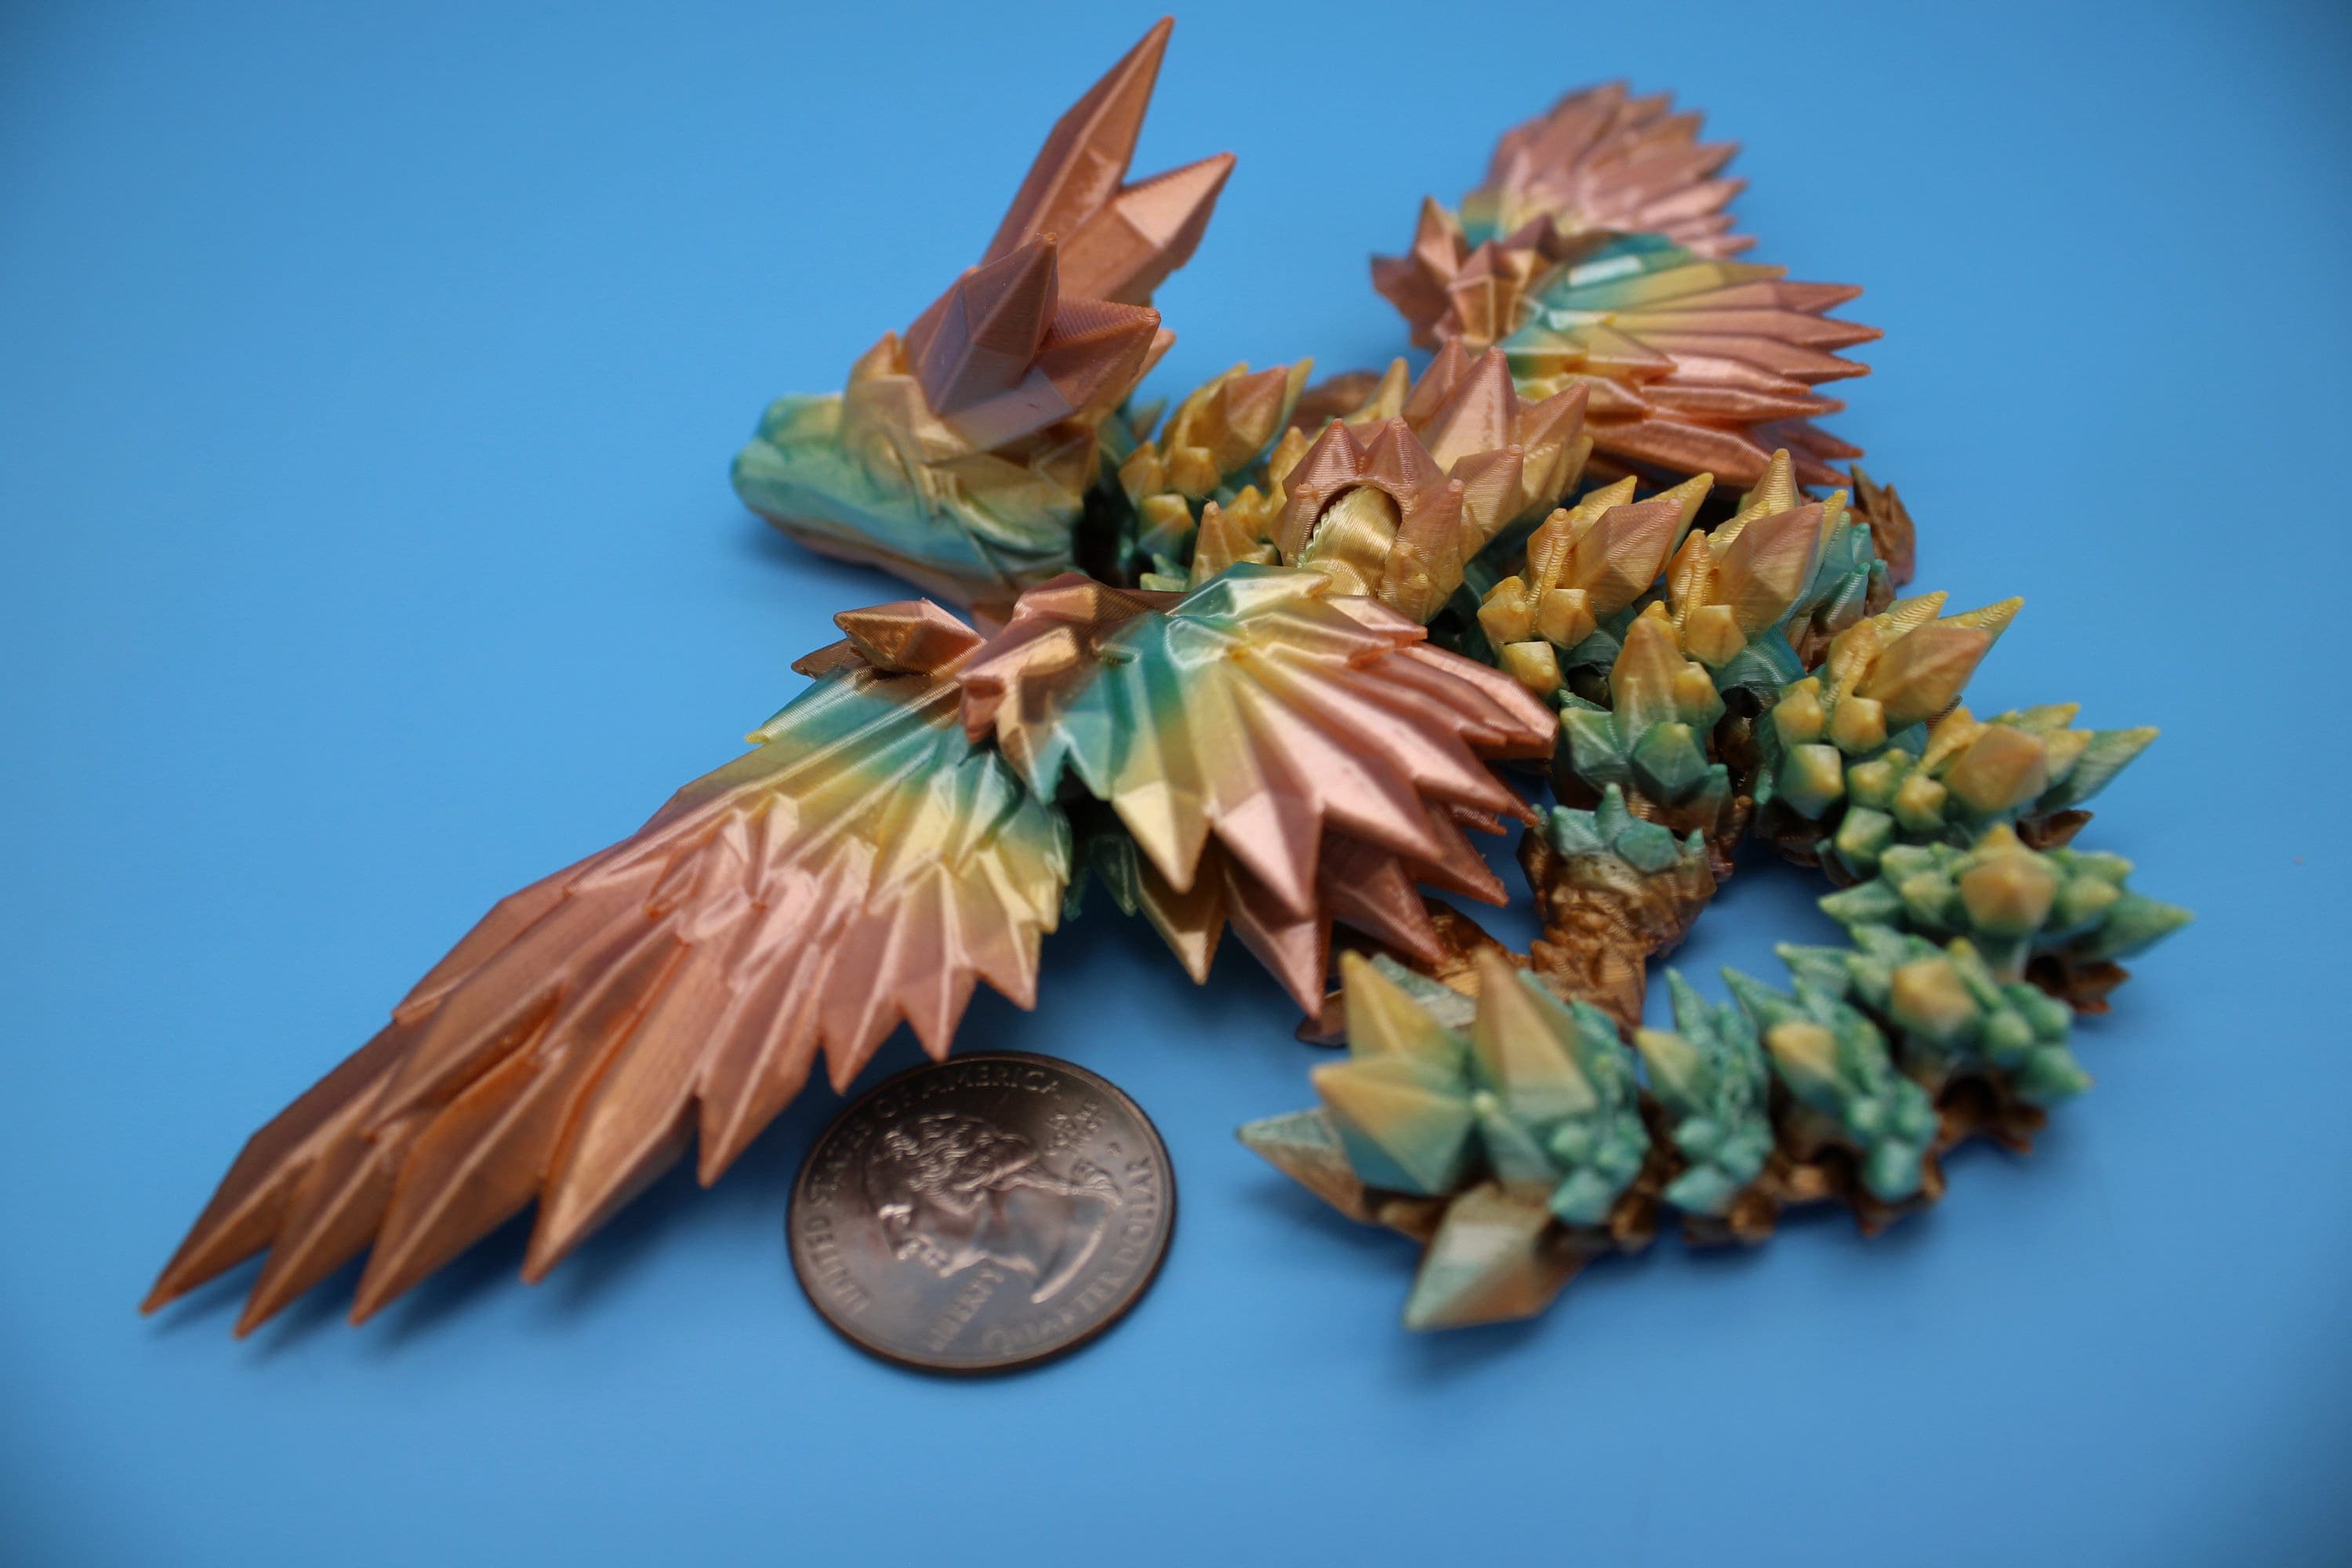 Miniature Baby Crystal Winged Dragon | Rainbow | 3D printed articulating Toy Fidget | Flexi Toy 7 in. head to tail | Stress Relief Gift